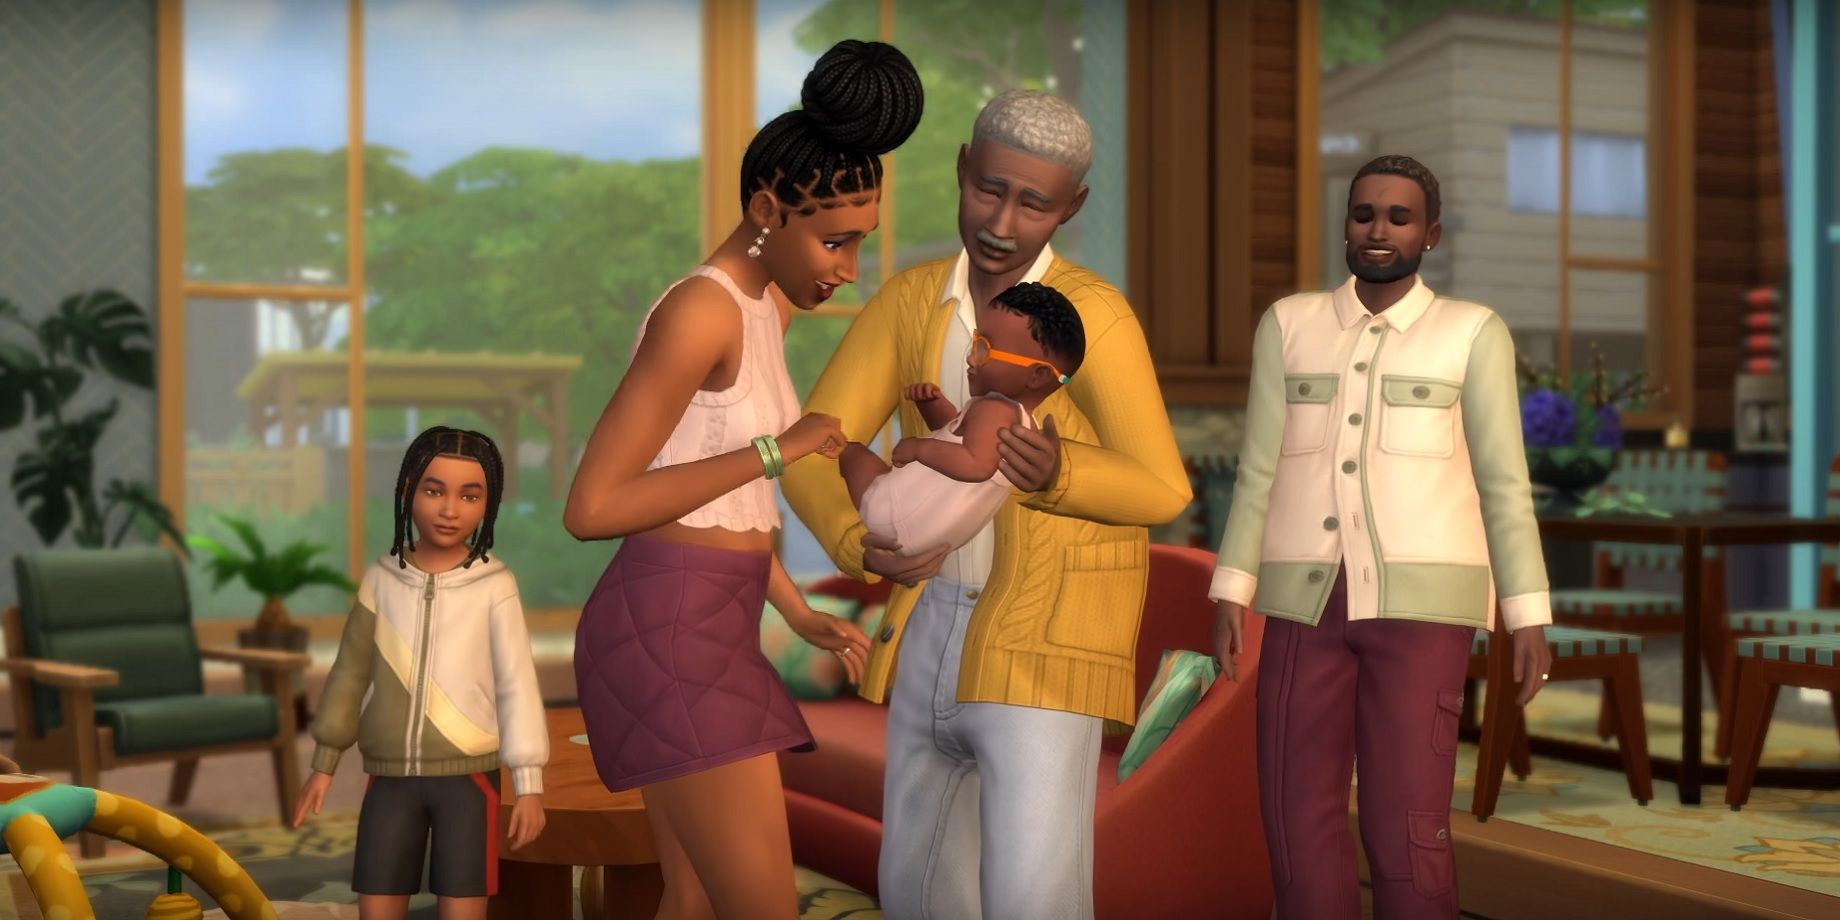 A Sims 4 Veteran Discovers Rare Achievement That Only A Fraction Of Simmers Will See